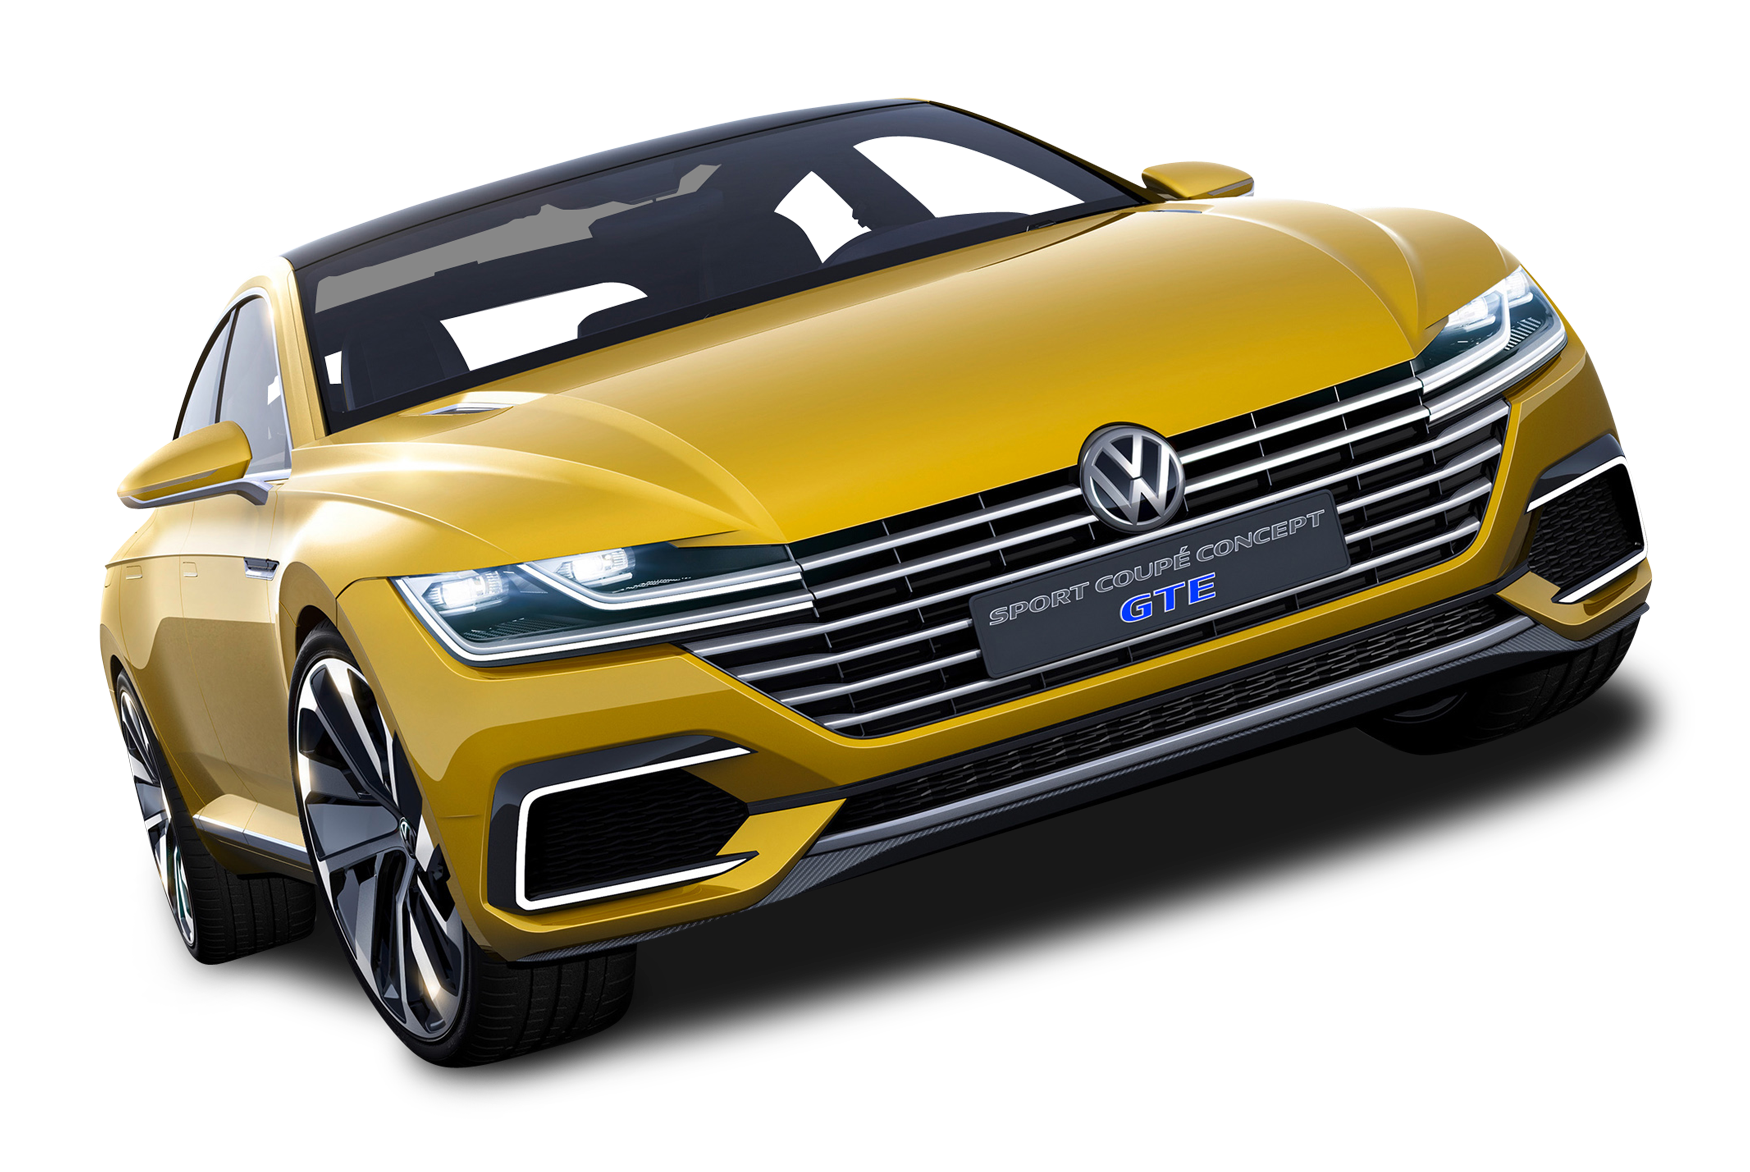 Yellow Volkswagen Sport Coupe Concept G T E PNG